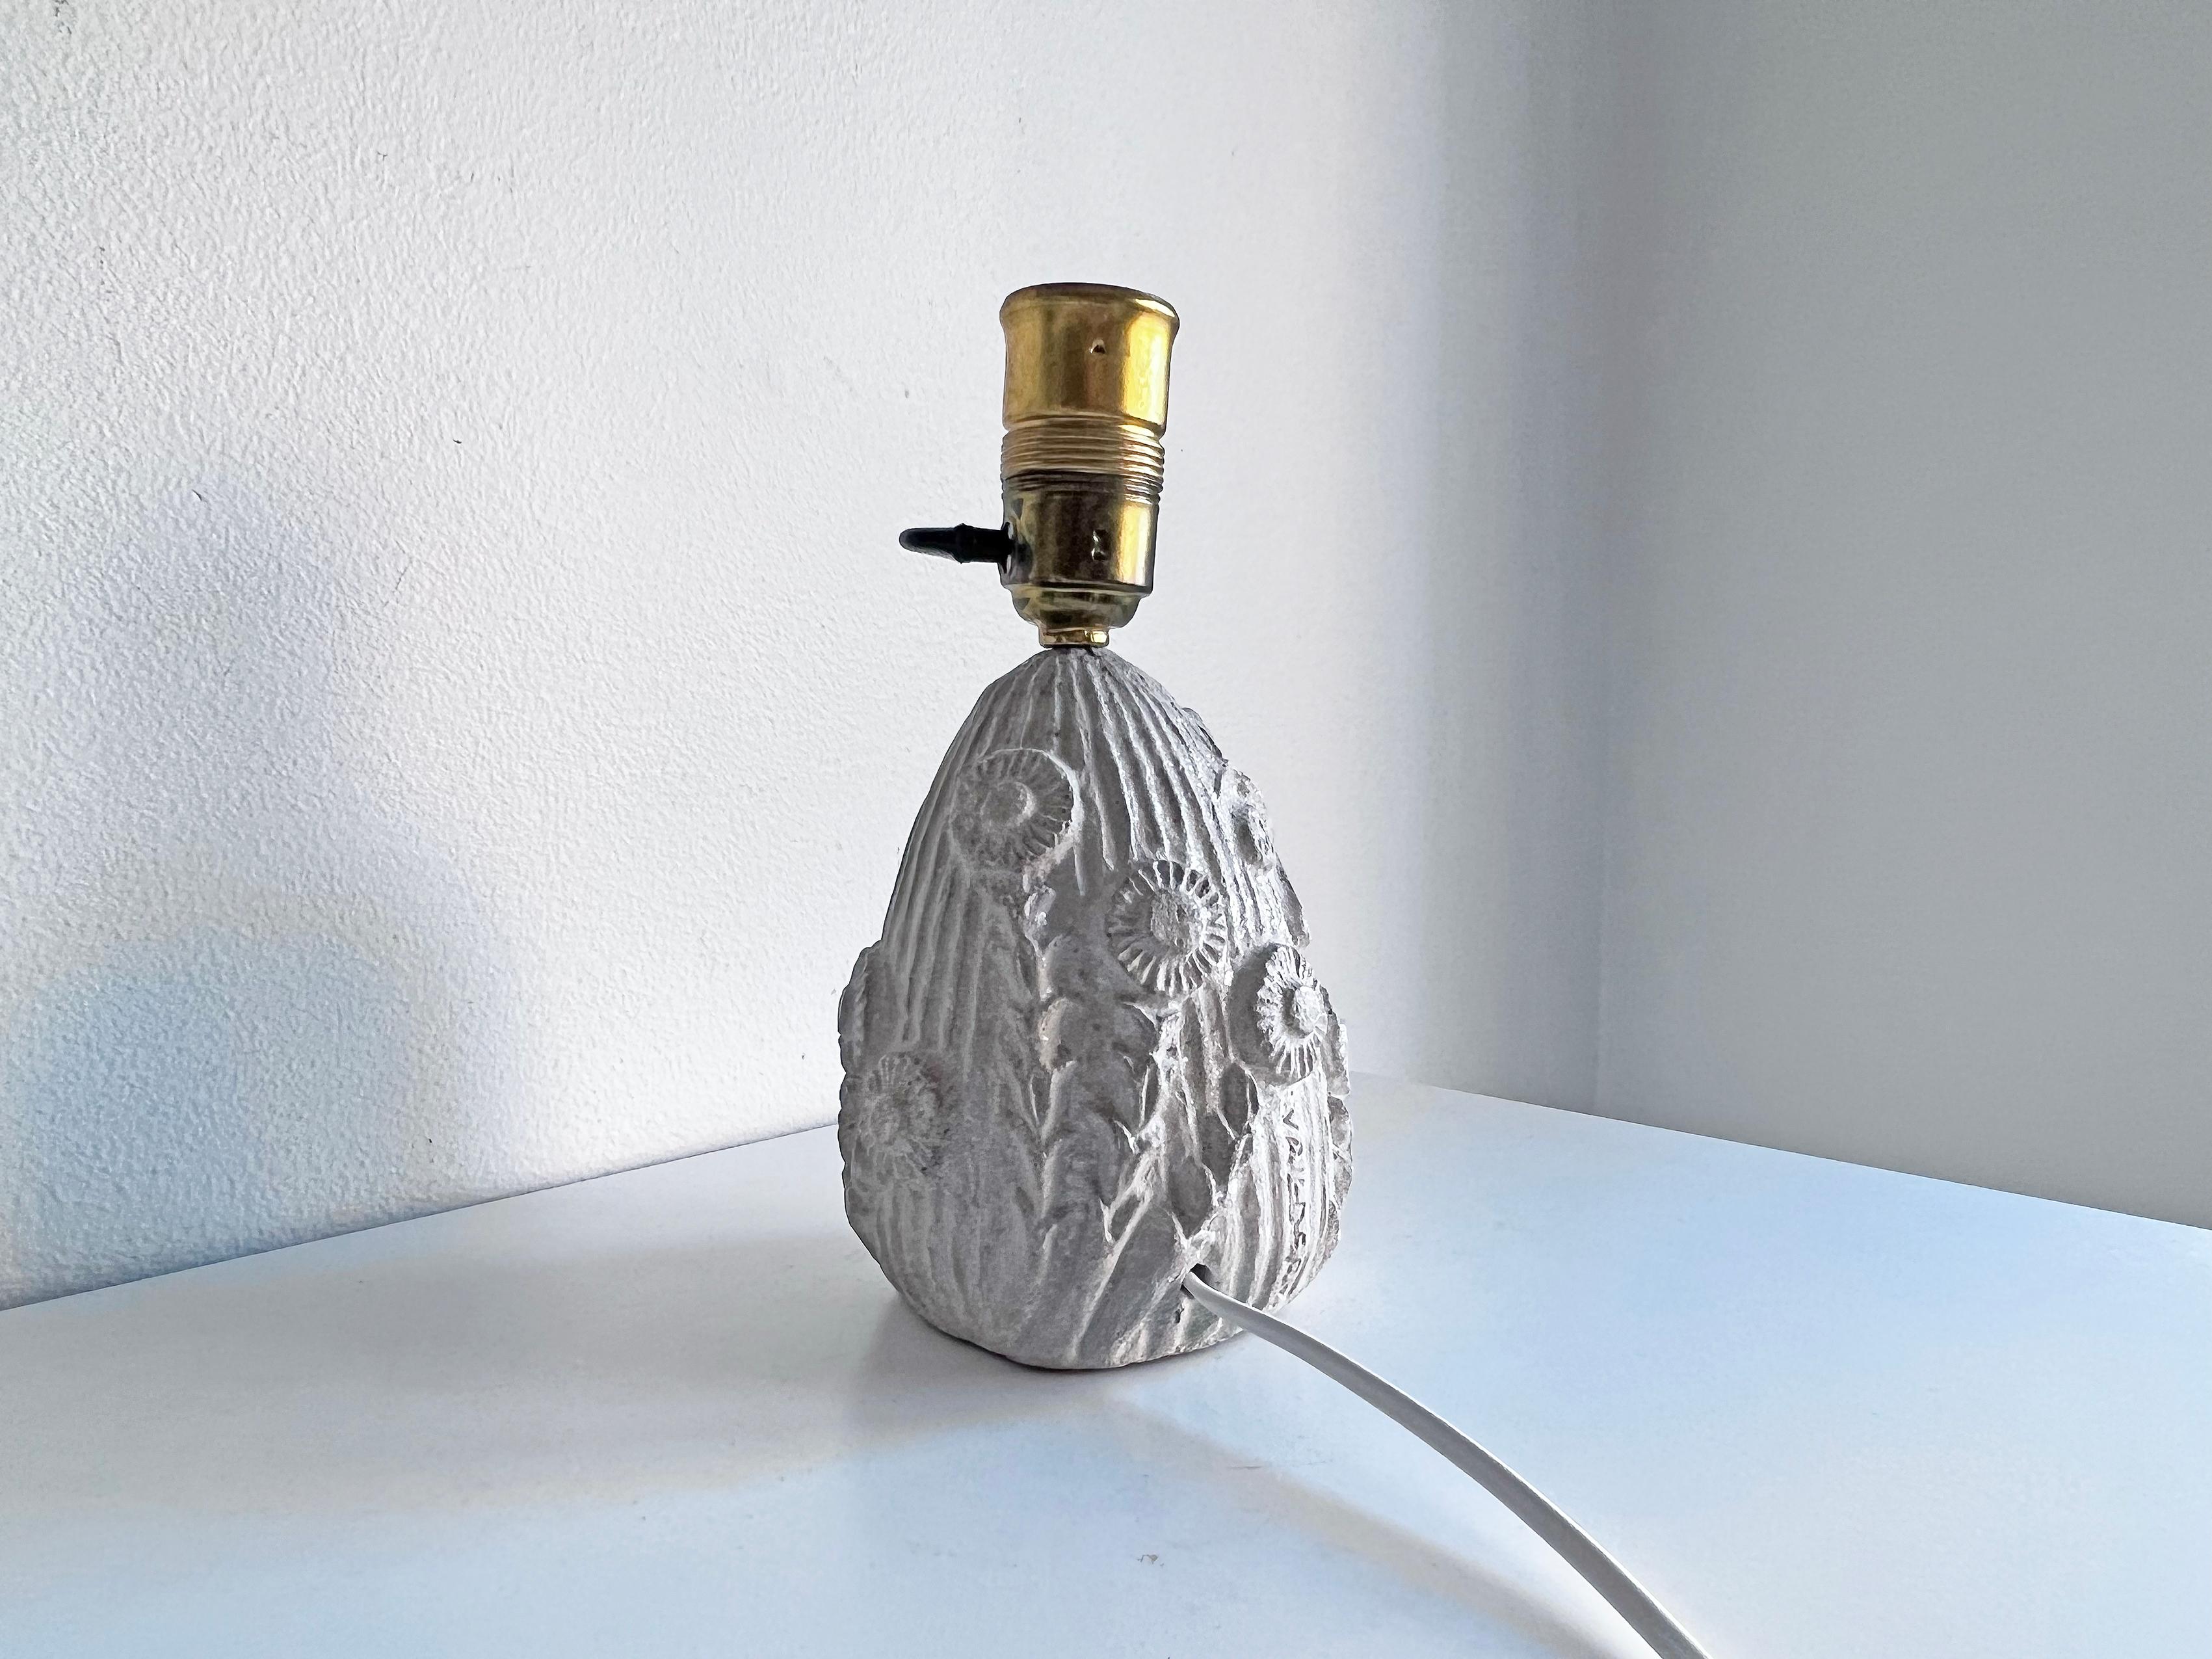 Table Lamp by Erling Valldeby, ca 1940-50s For Sale 7